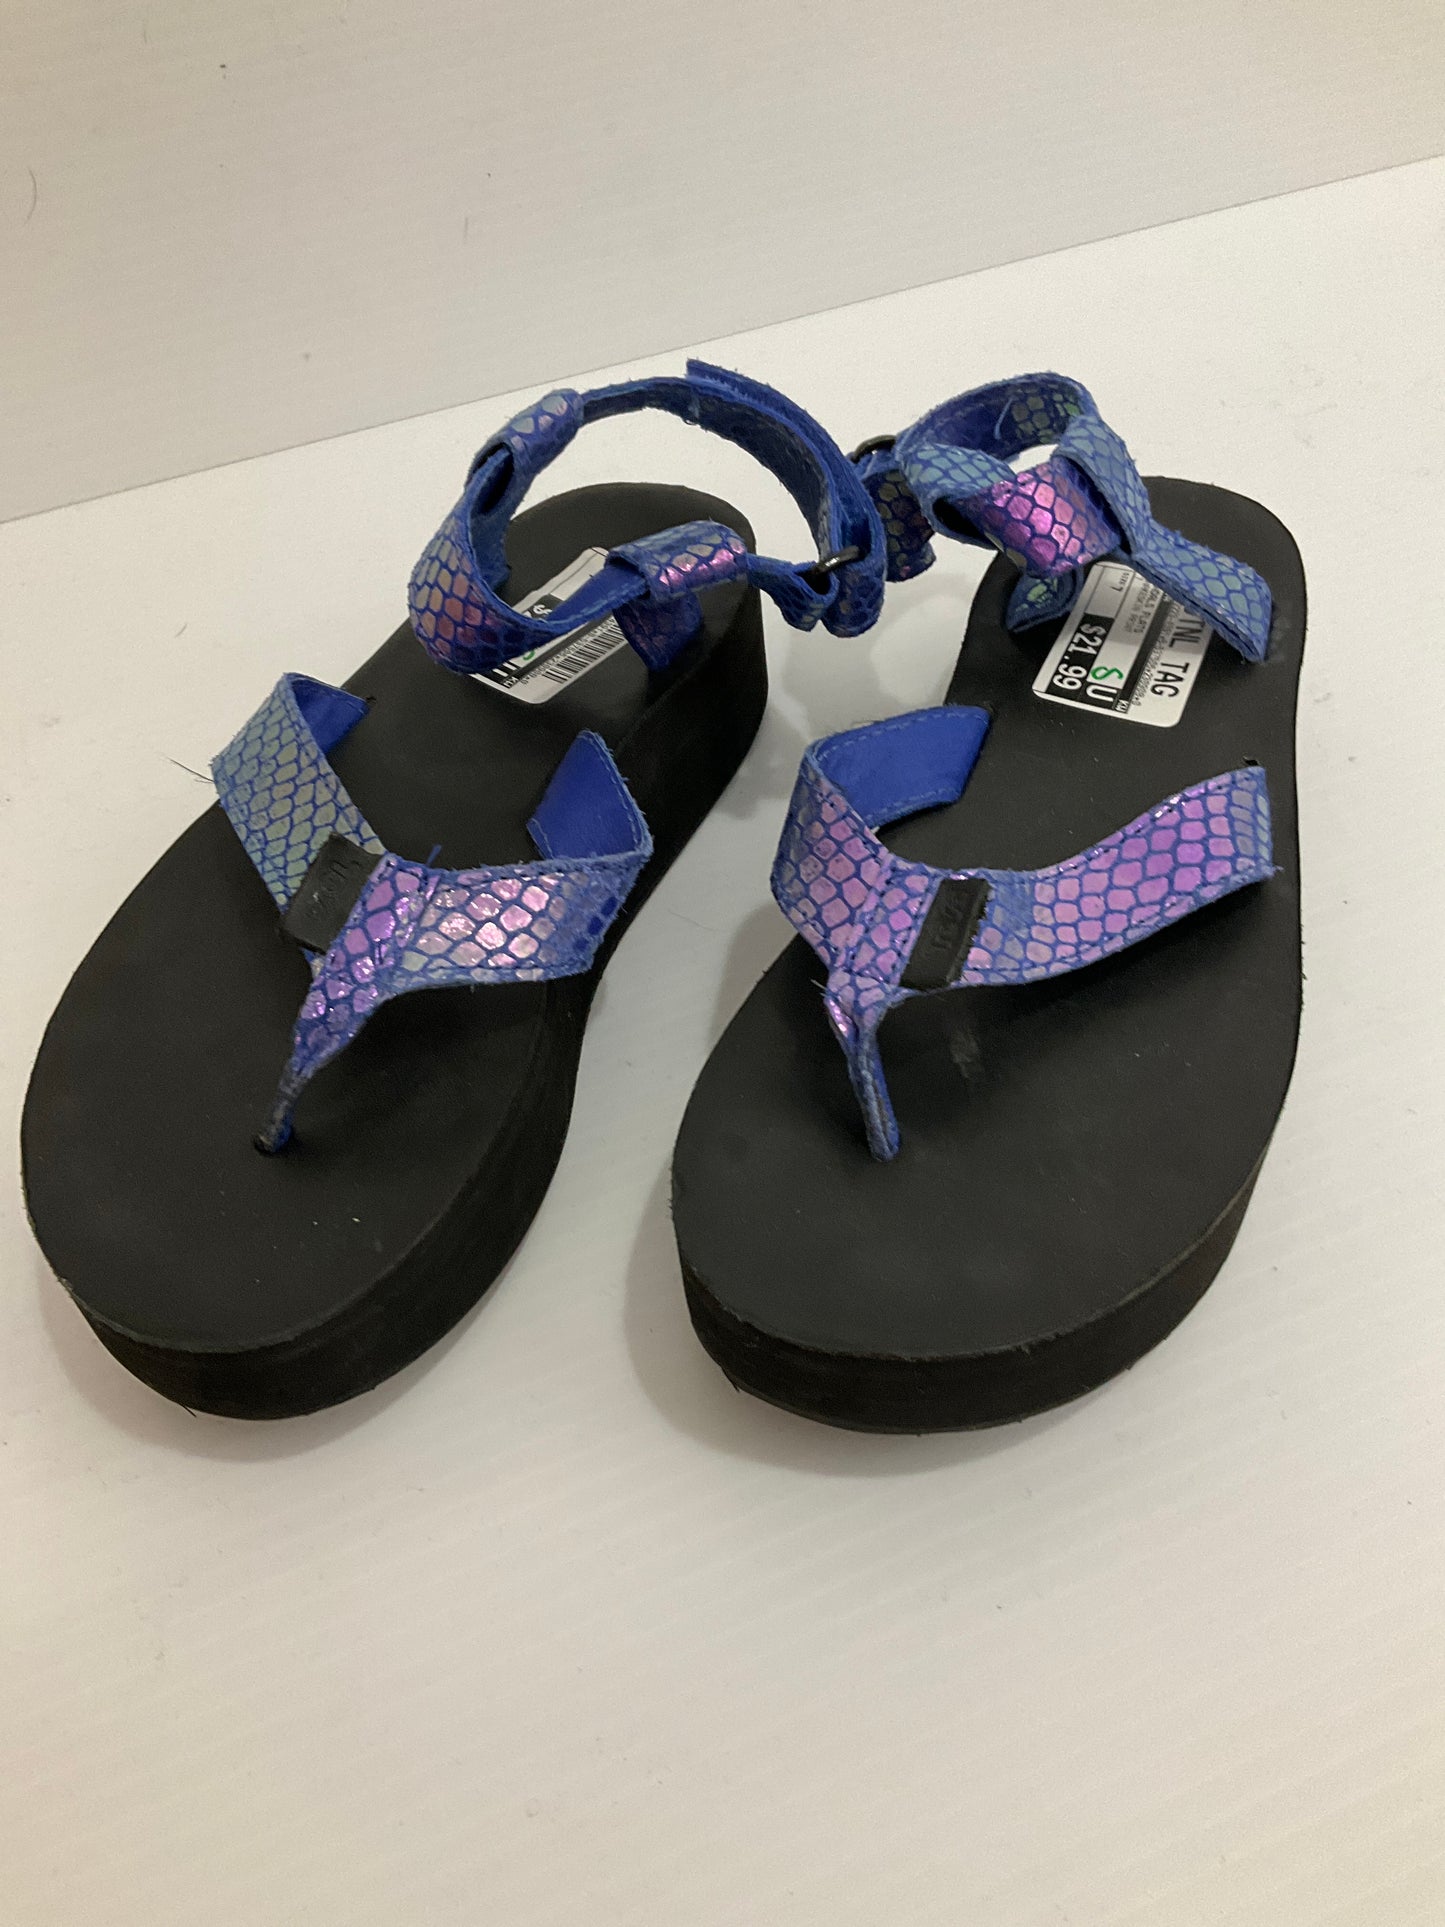 Sandals Flats By Teva  Size: 7